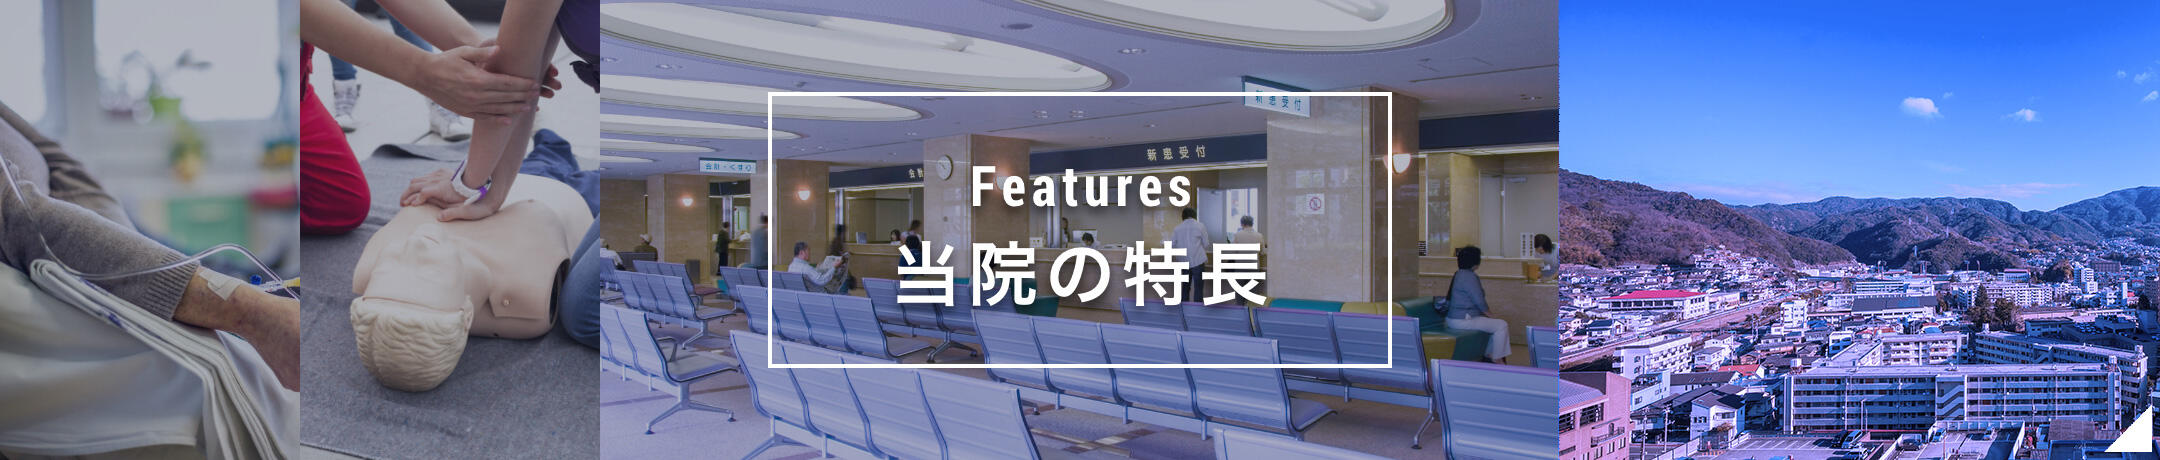 Features 私たちの特長